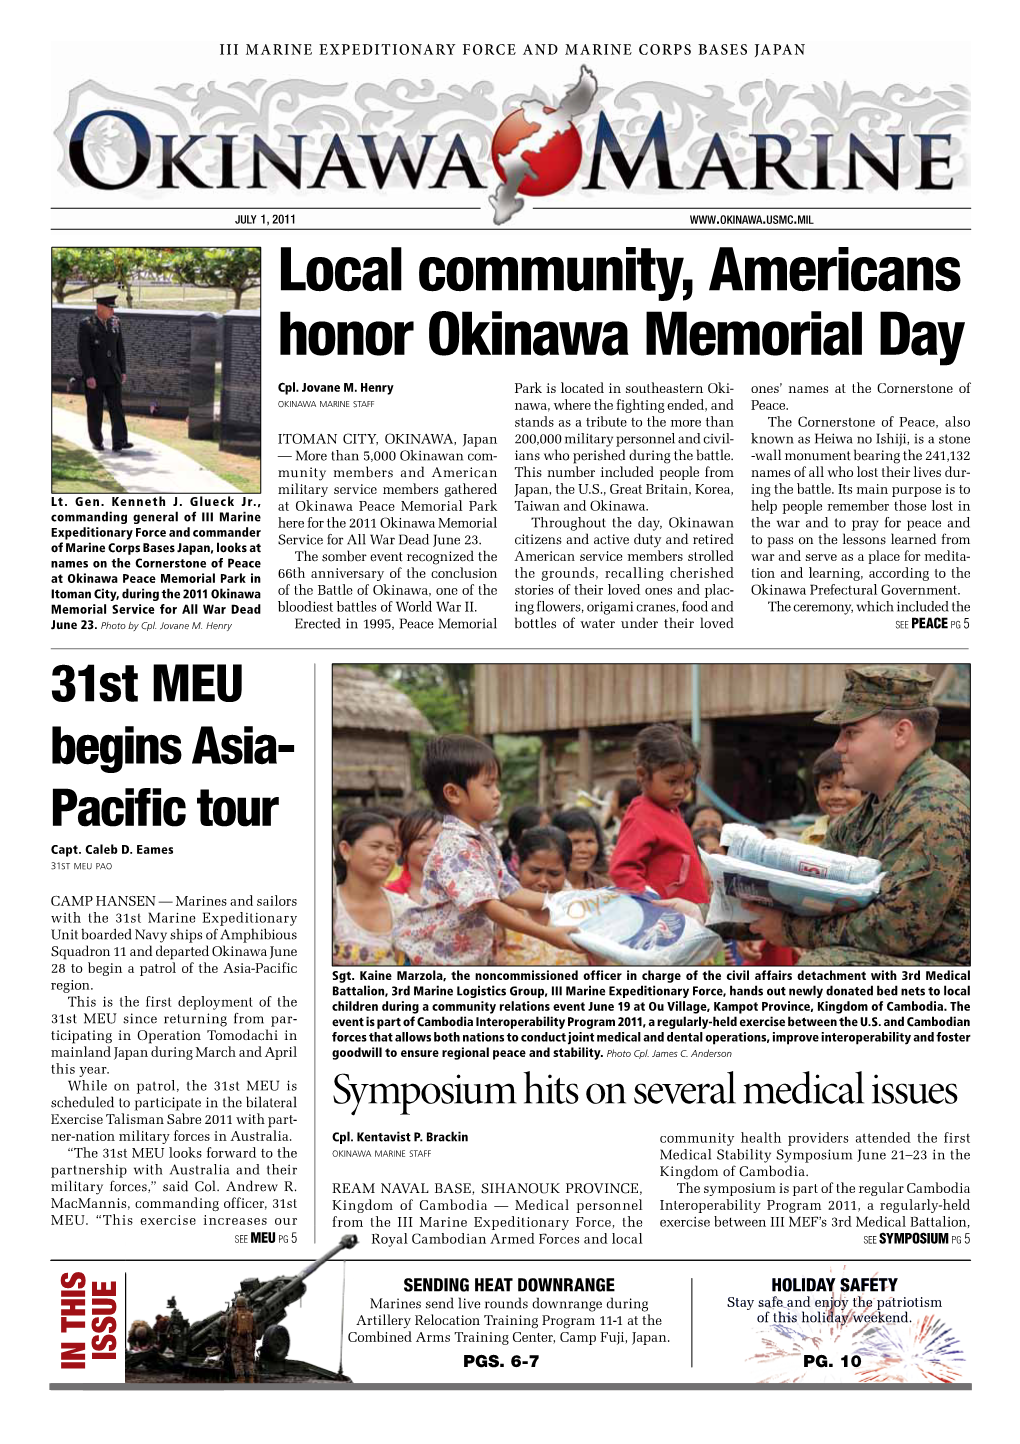 Local Community, Americans Honor Okinawa Memorial Day Cpl